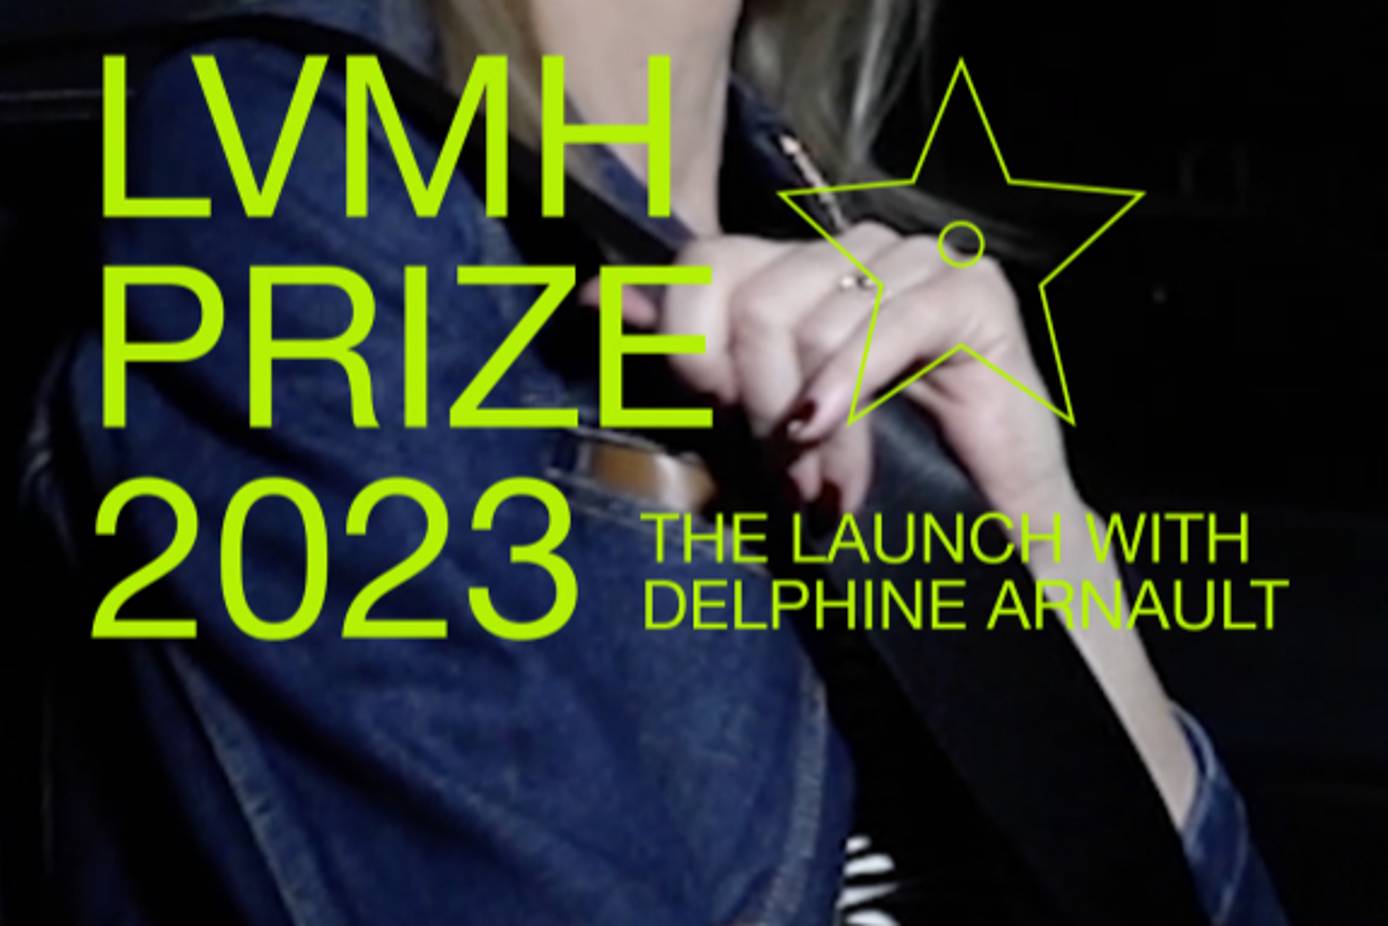 LVMH Prize 2023 - 10th Edition  The 10th edition of the LVMH